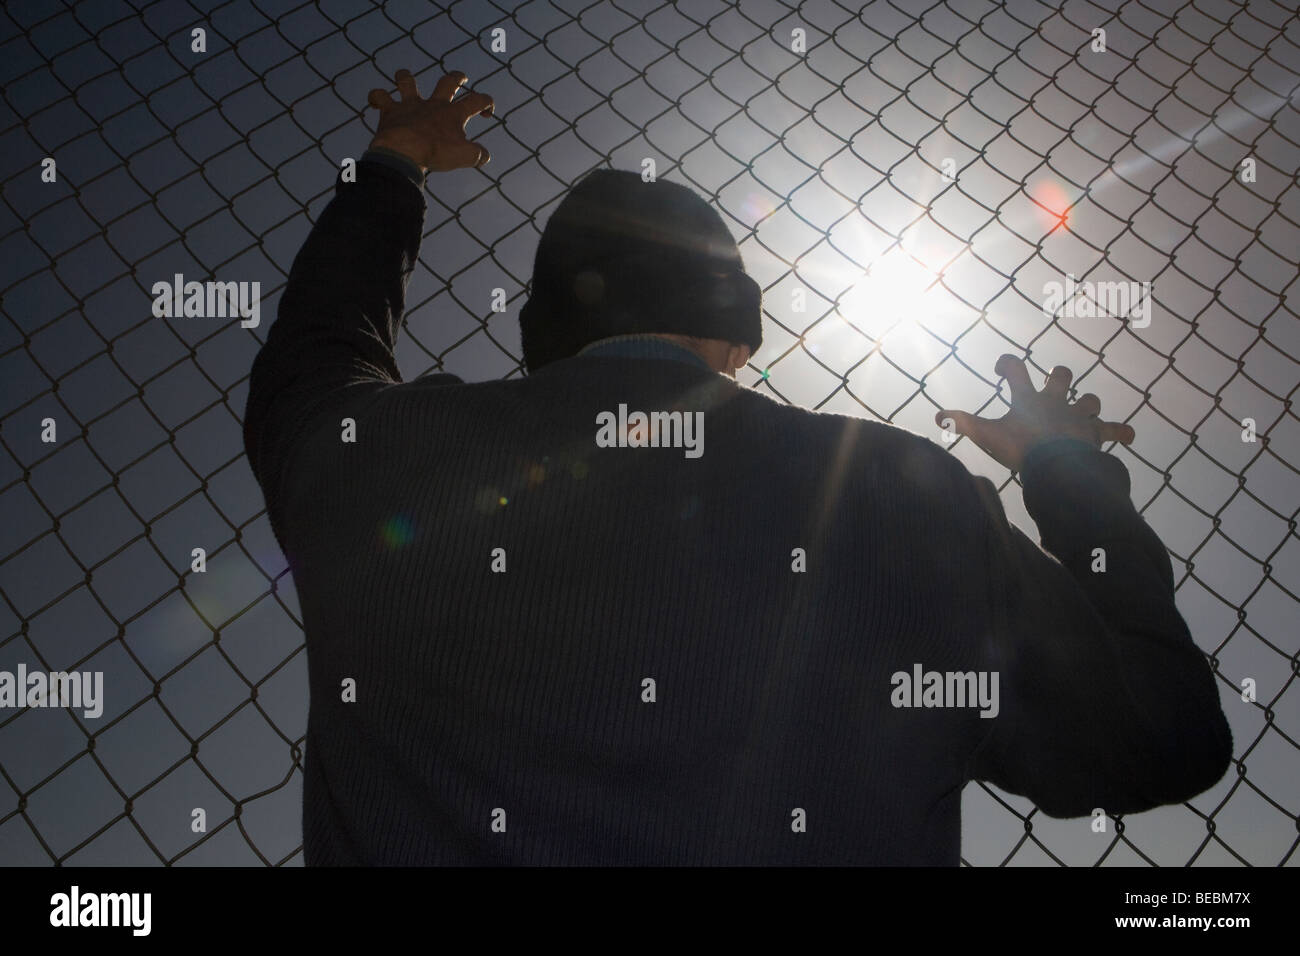 Rear view of a man looking through a chainlink fence Stock Photo